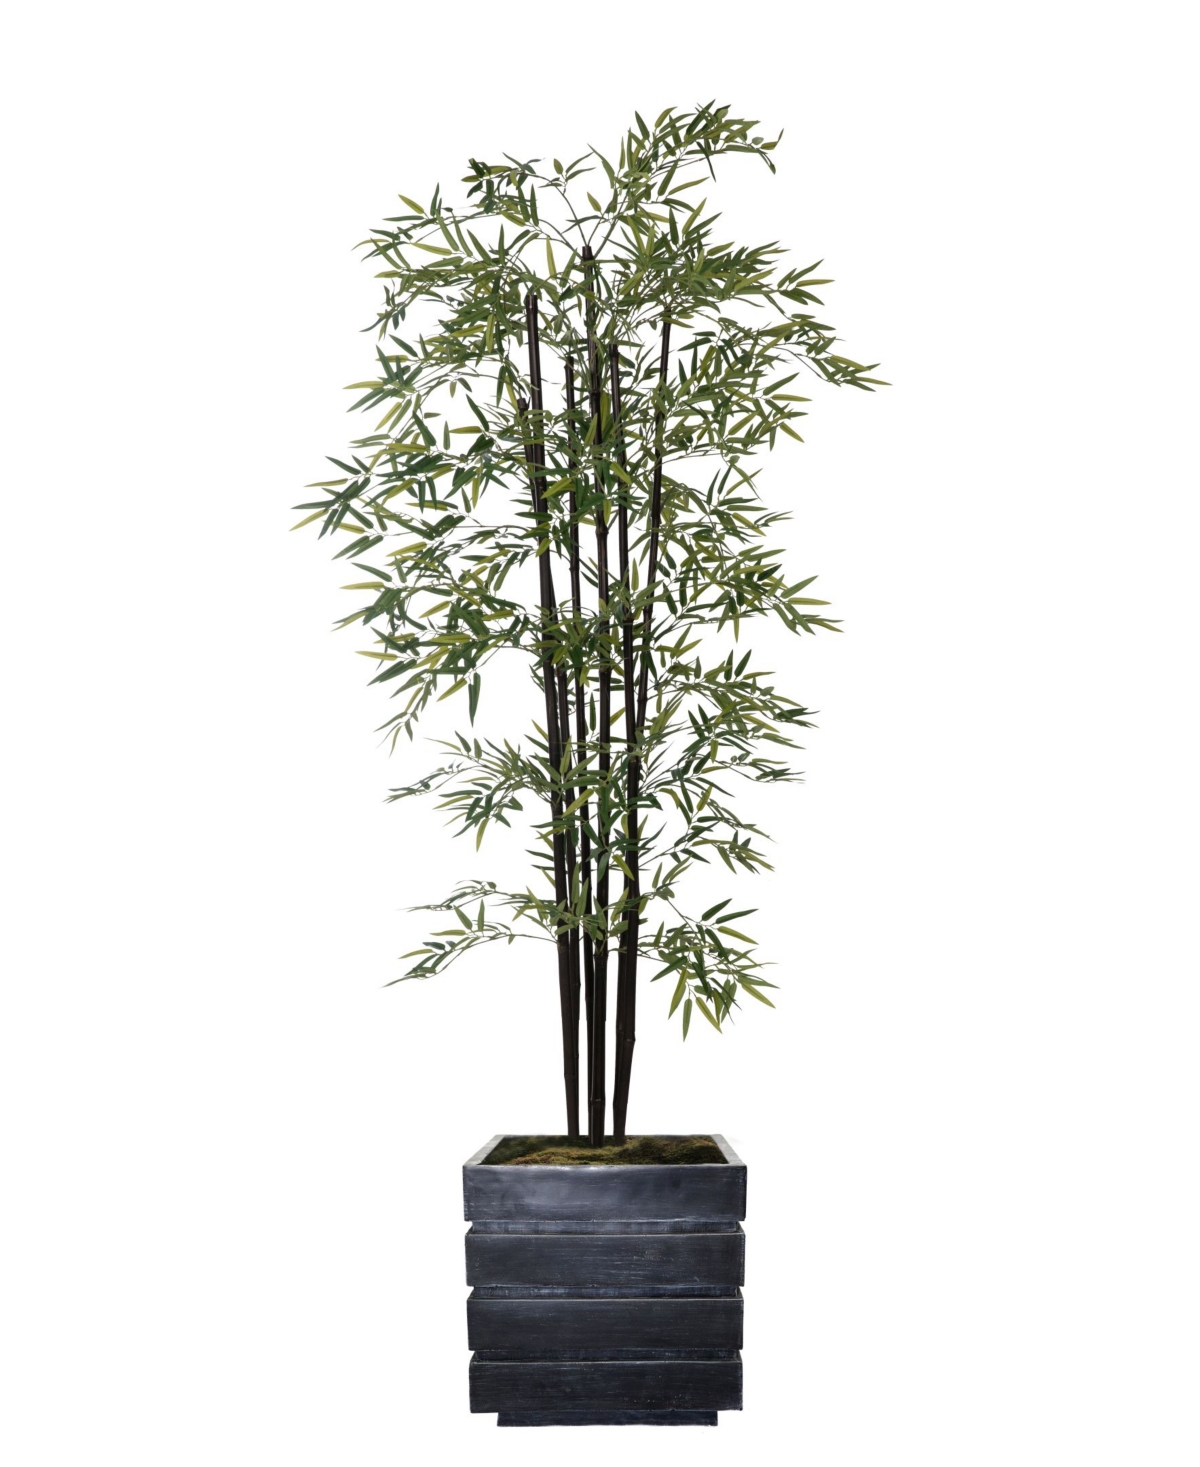 78" Tall Bamboo Tree With Decorative Black Poles and Fiberstone Planter - Green